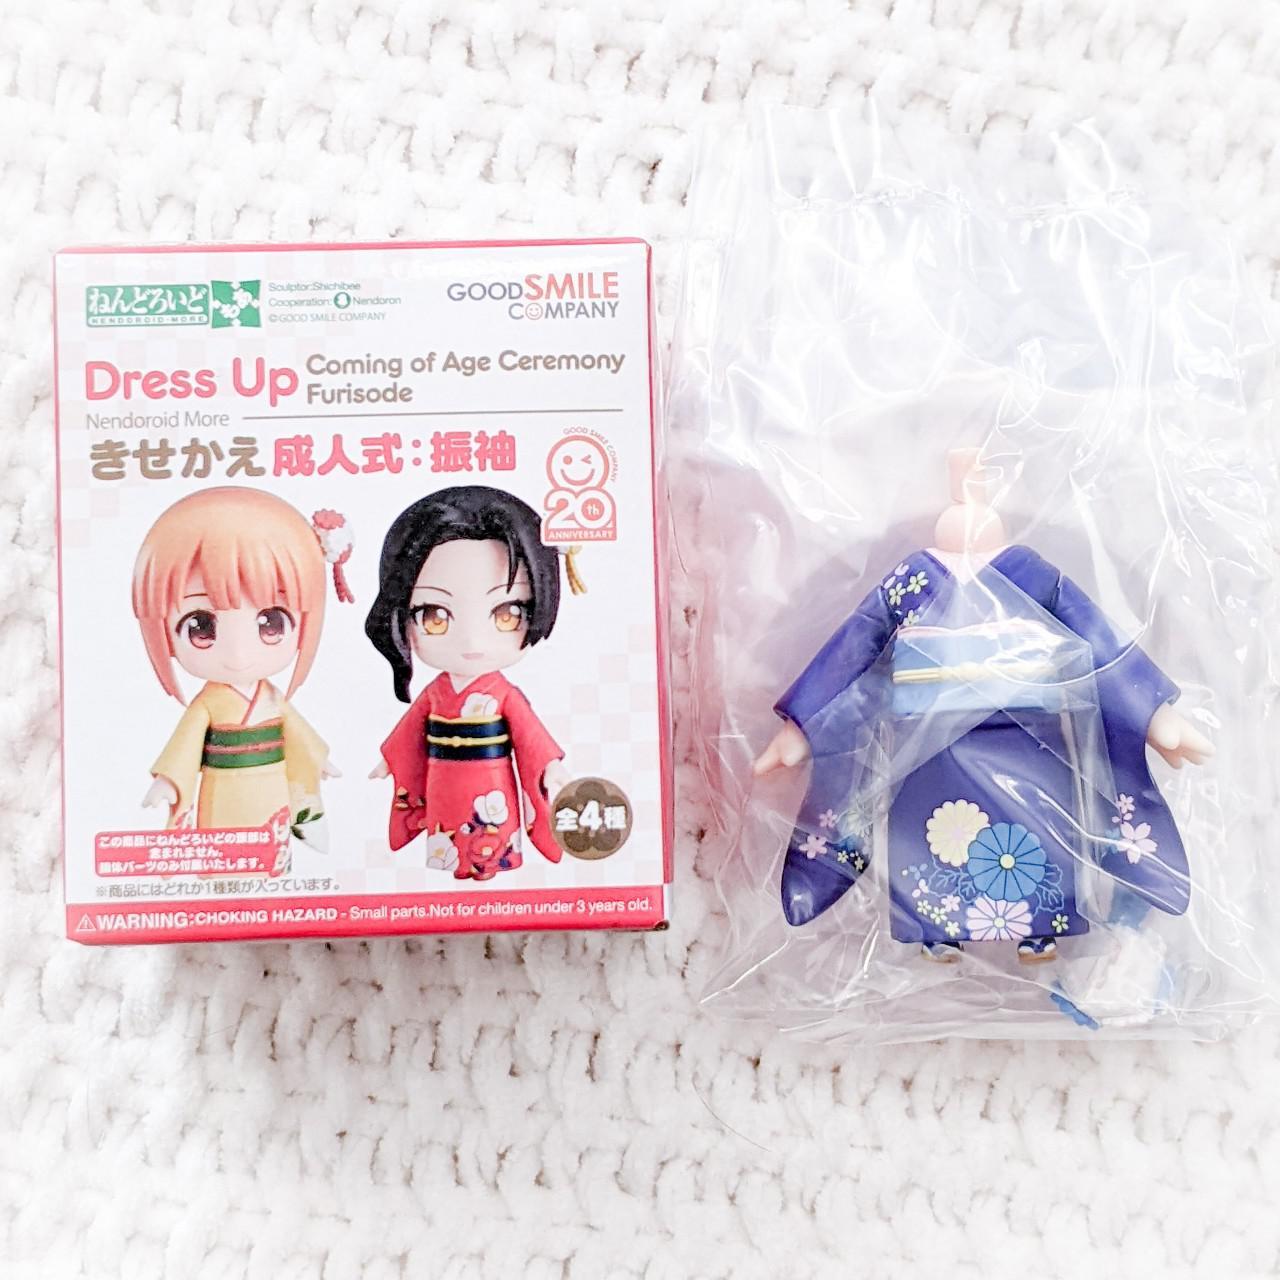 Nendoroid More Dress Up Outfit - Coming of Age Ceremony Kimono Furisode (BLUE)